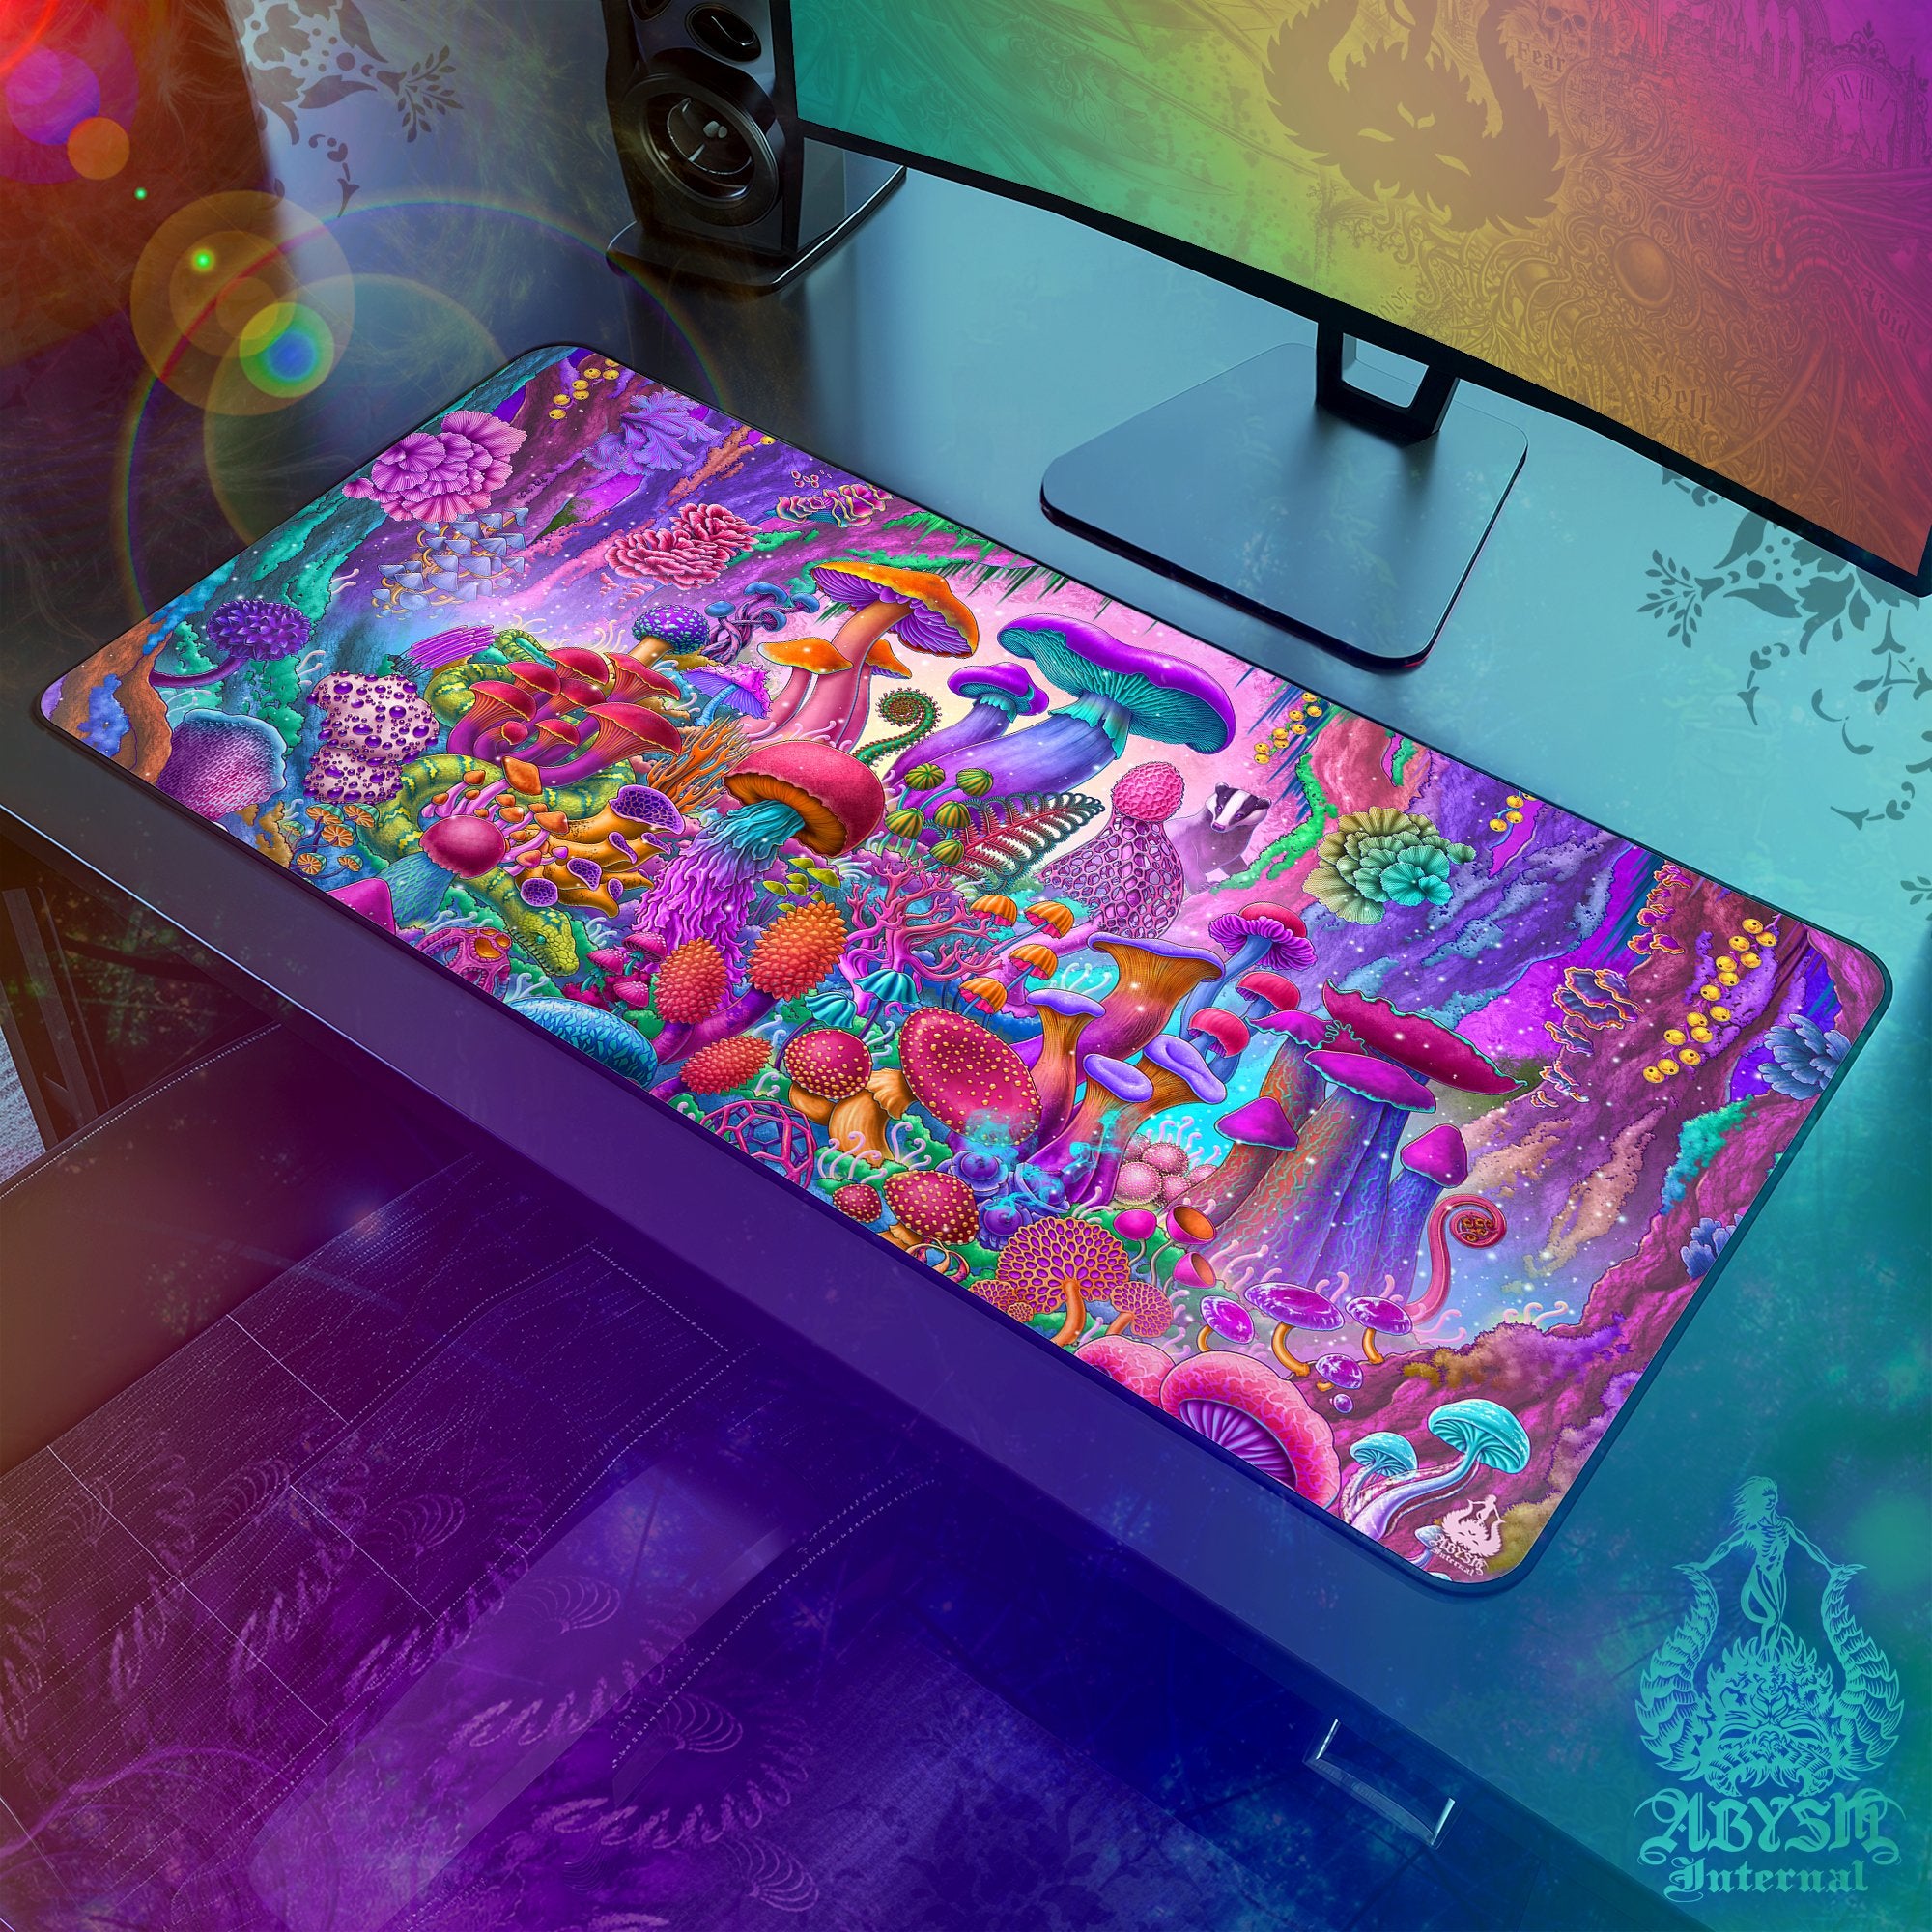 Magic Mushrooms Desk Mat, Psychedelic Shrooms Gaming Mouse Pad, Pastel Table Protector Cover, Colorful Workpad - Abysm Internal